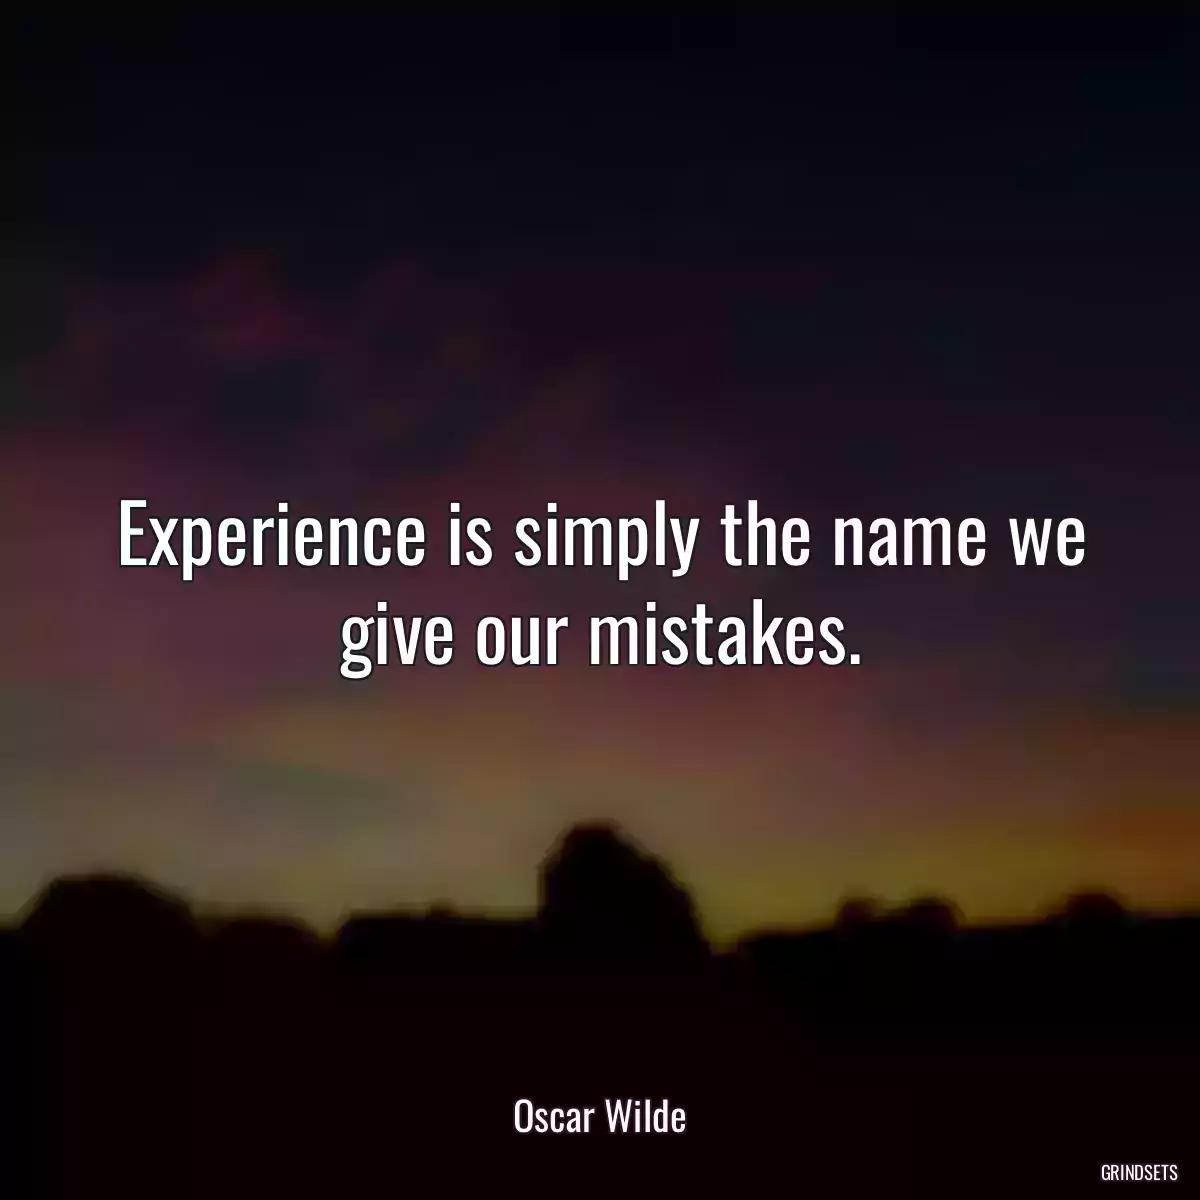 Experience is simply the name we give our mistakes.